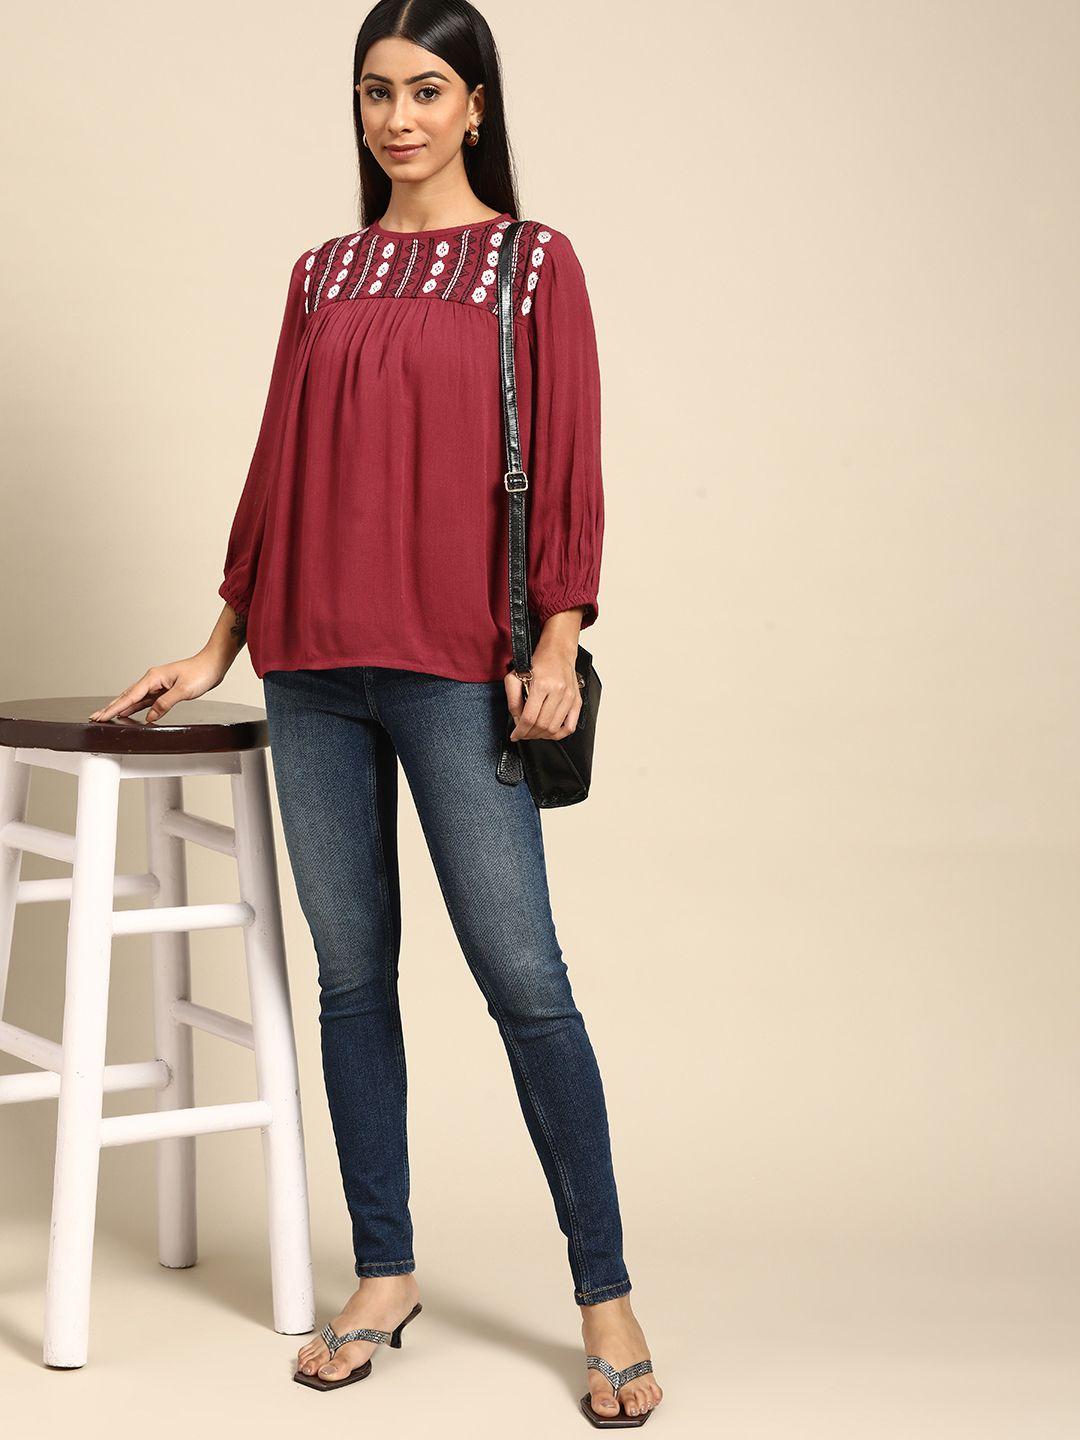 all about you maroon & white geometric embroidered top